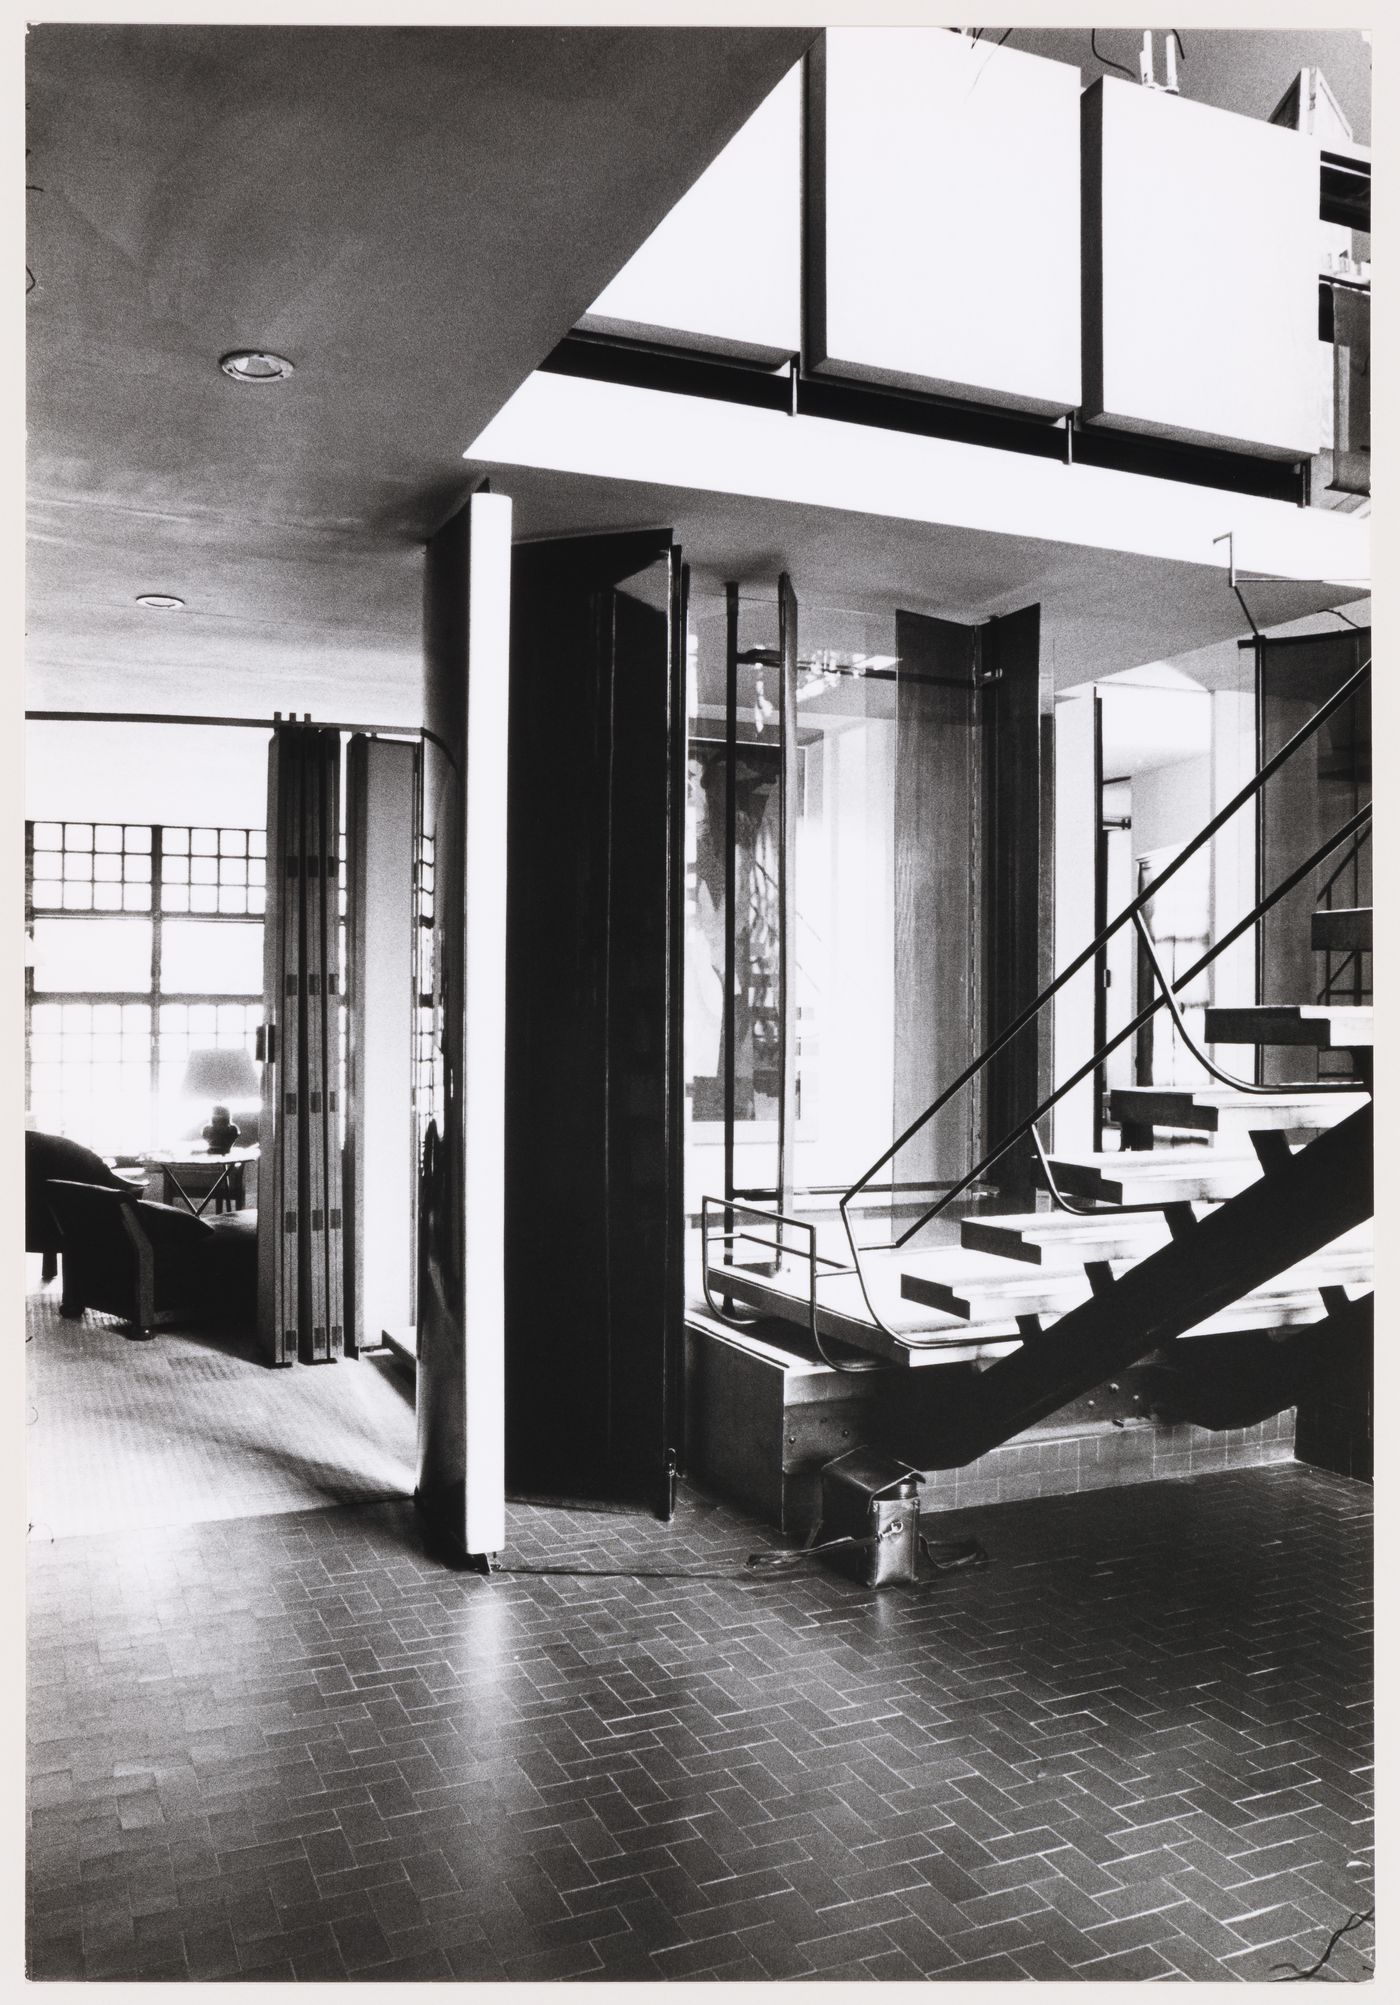 Interior view of Maison de Verre, Paris, France, showing patients' waiting area viewed from service hall